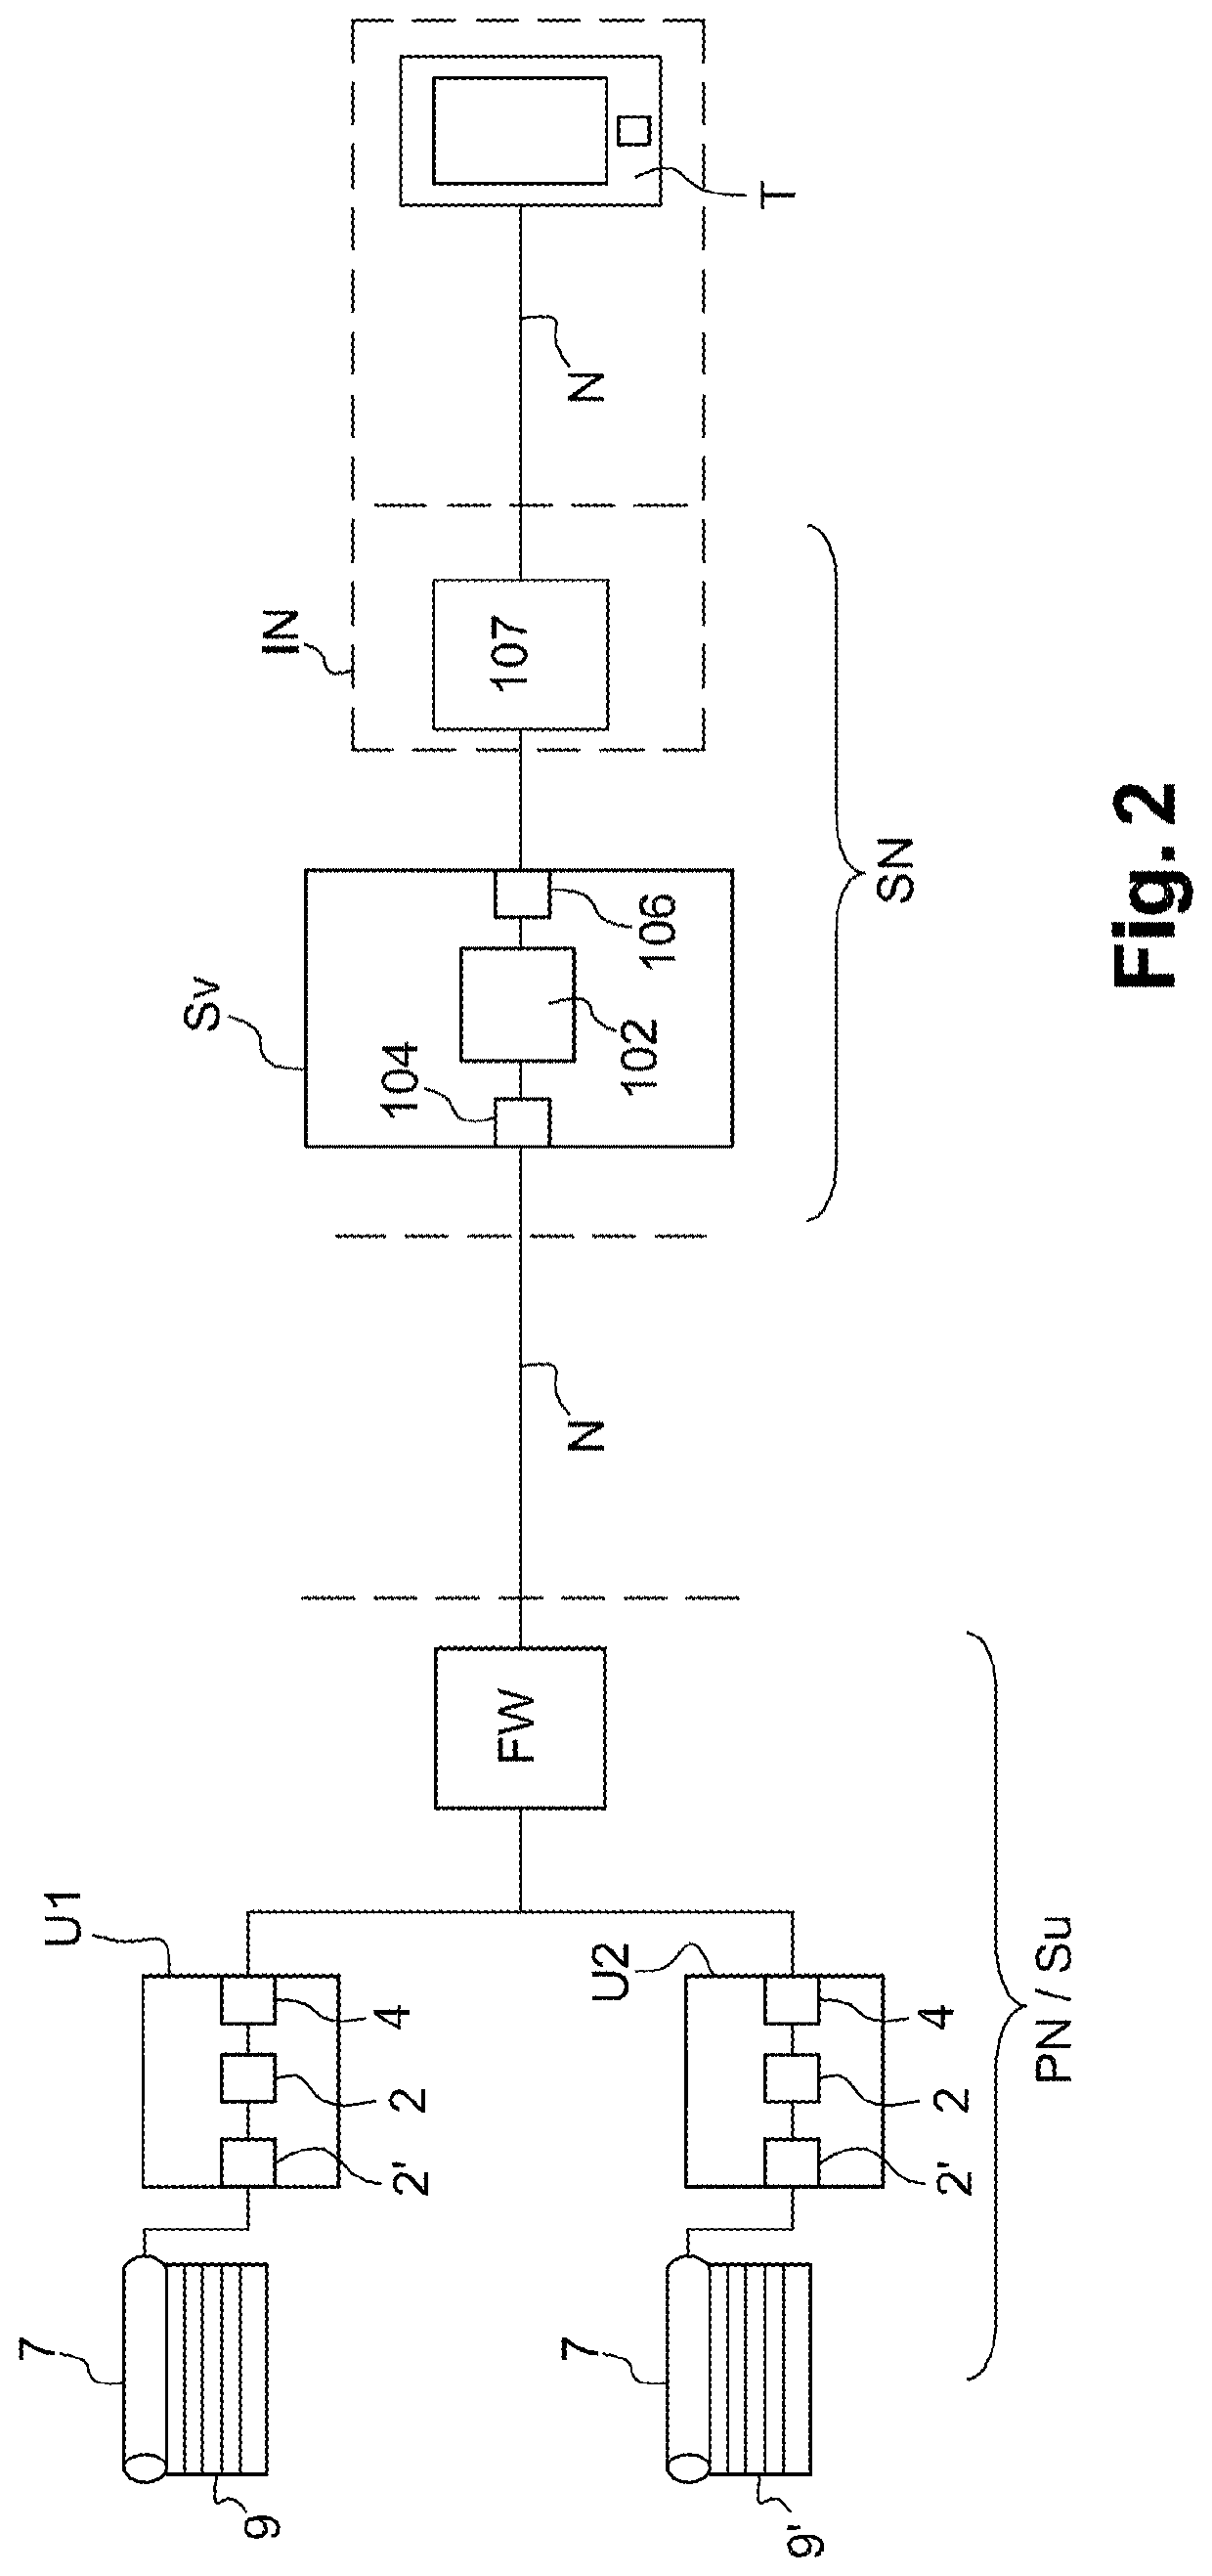 Method for configuring, controlling or monitoring home automation equipment